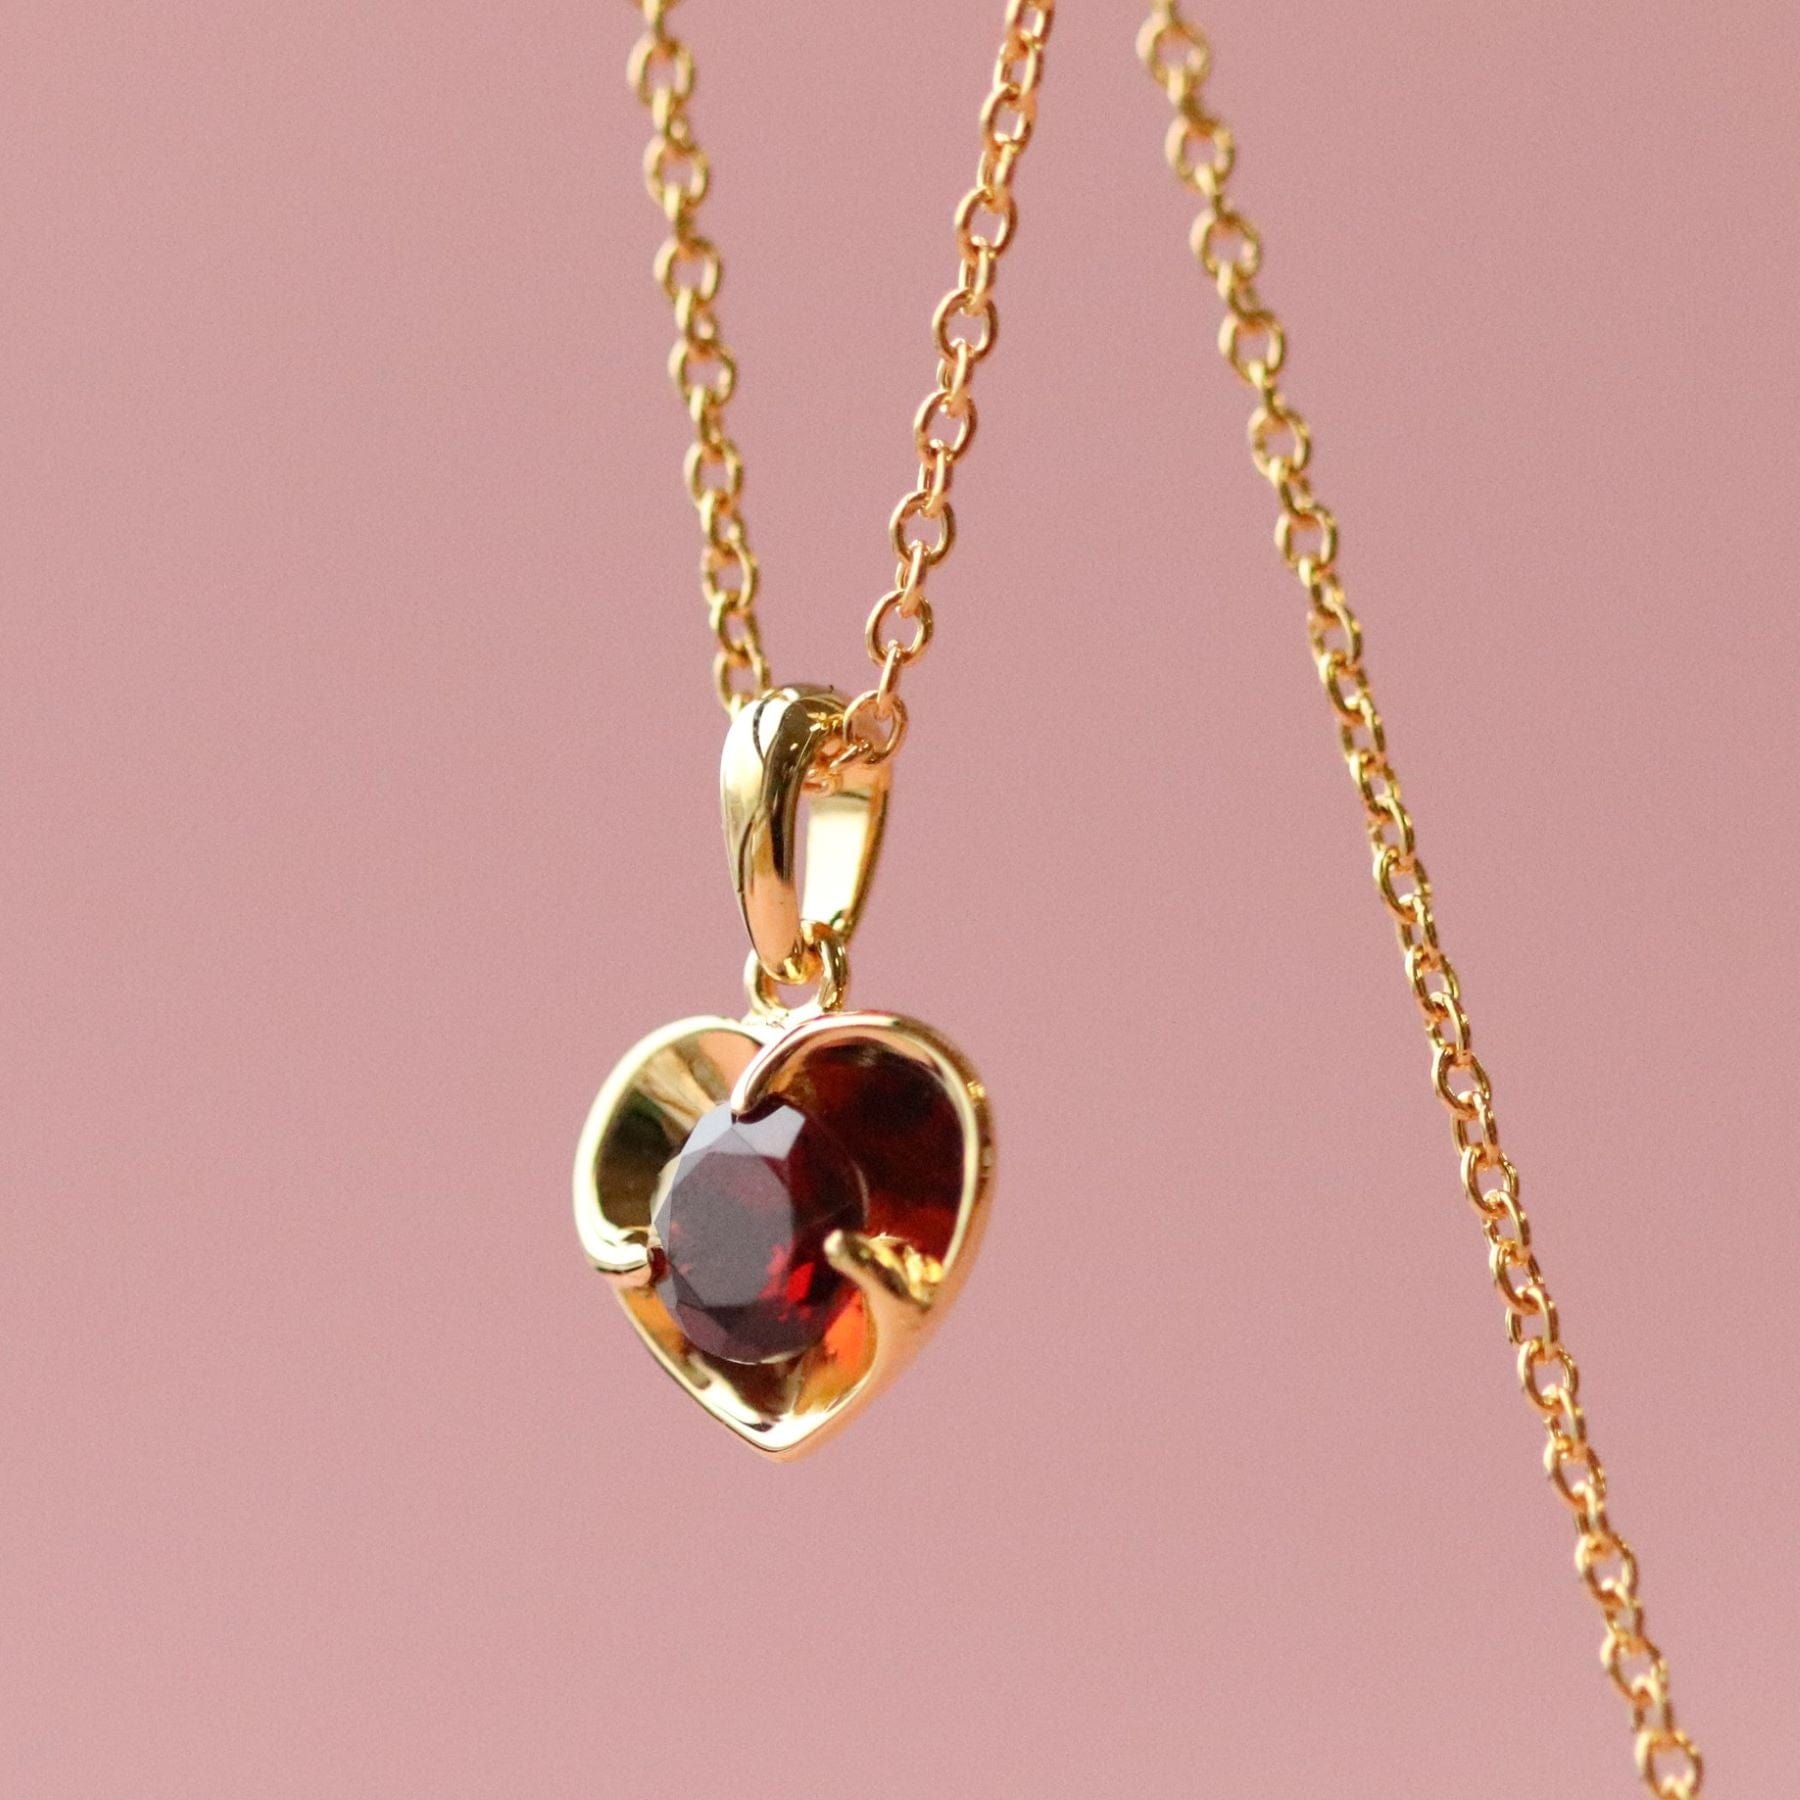 Daughter's Blessing Heart Necklace with a Garnet Stone - YourHolyLandStore